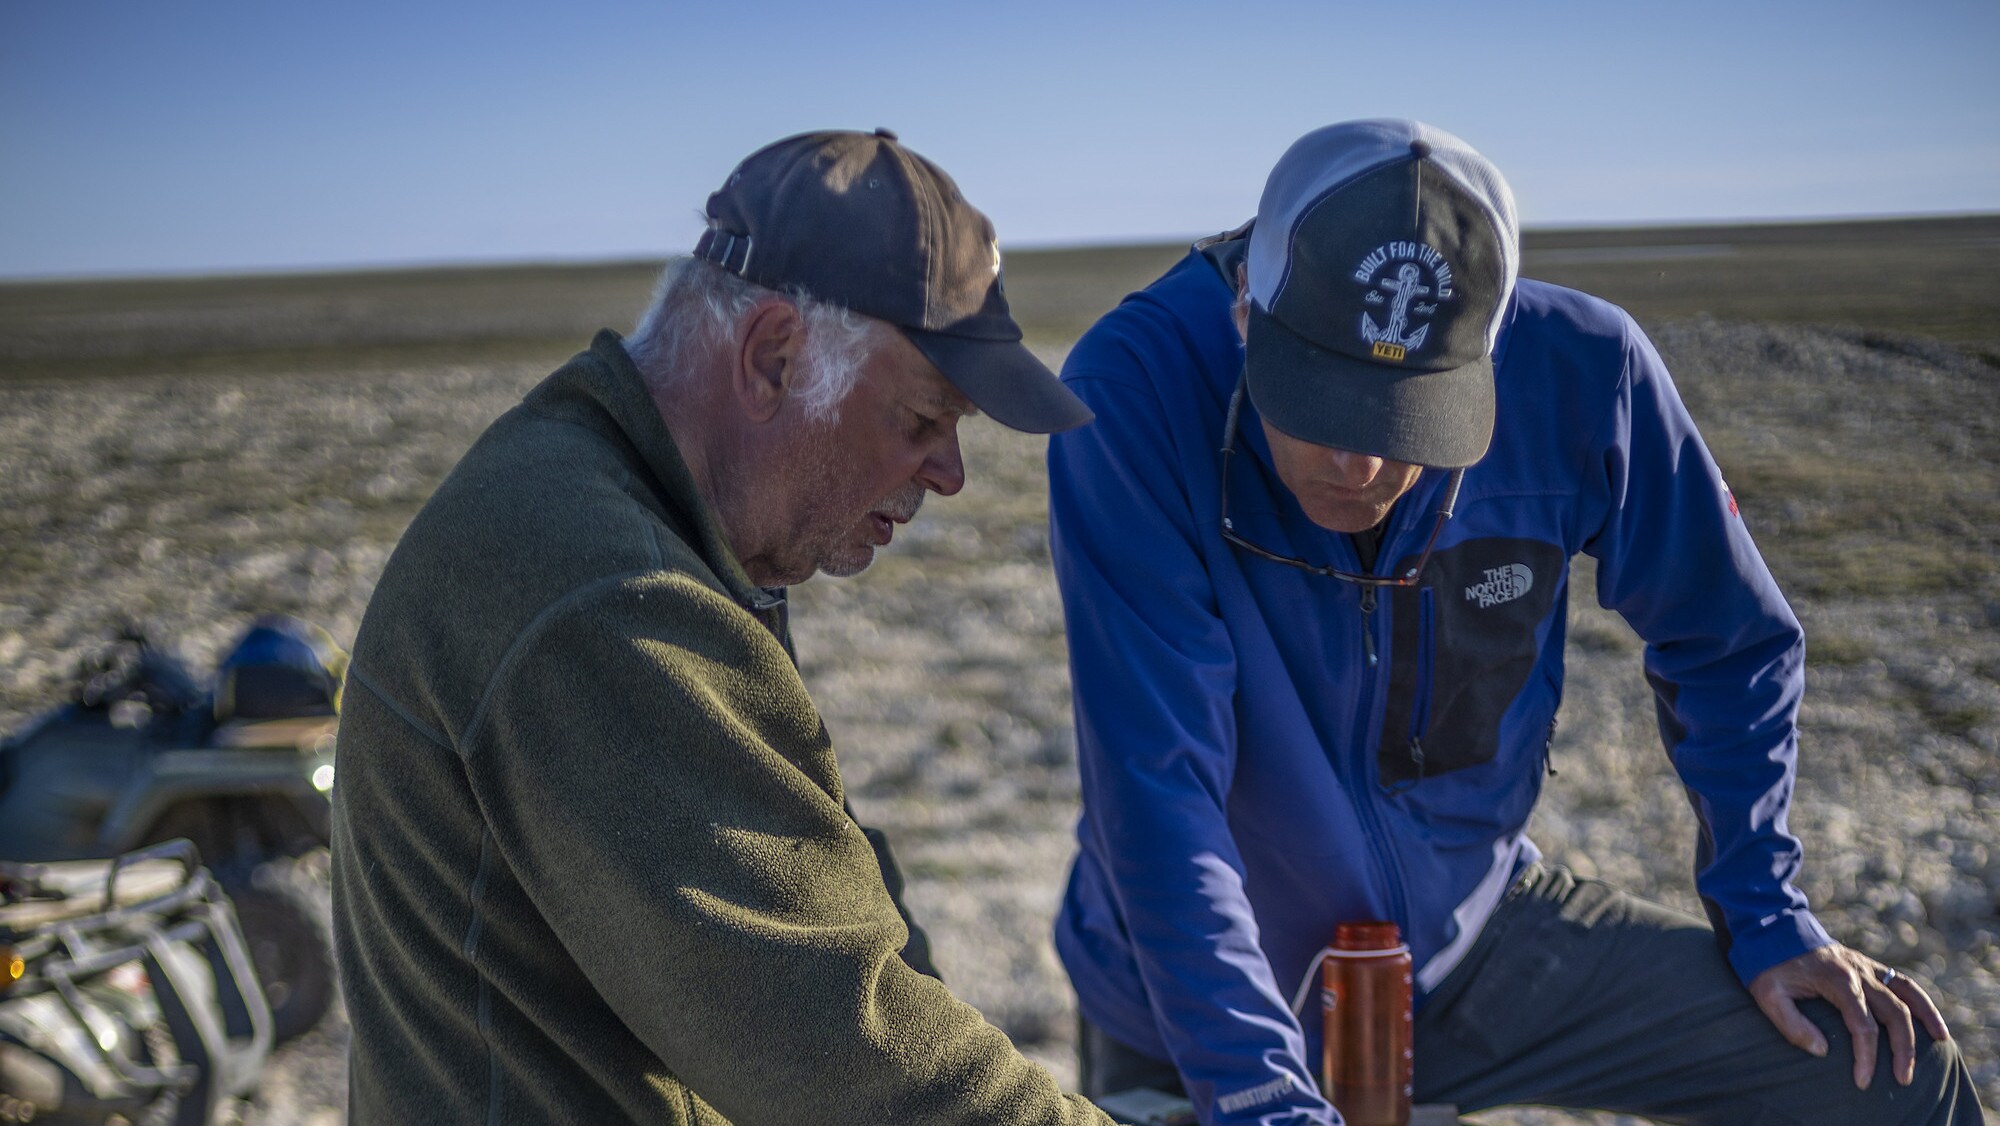 Explorer Mark Synnott and Franklin historian Tom Gross look over a map during their journey across King William Island to look for Sir John Franklin's lost tomb. (National Geographic/Renan Ozturk)